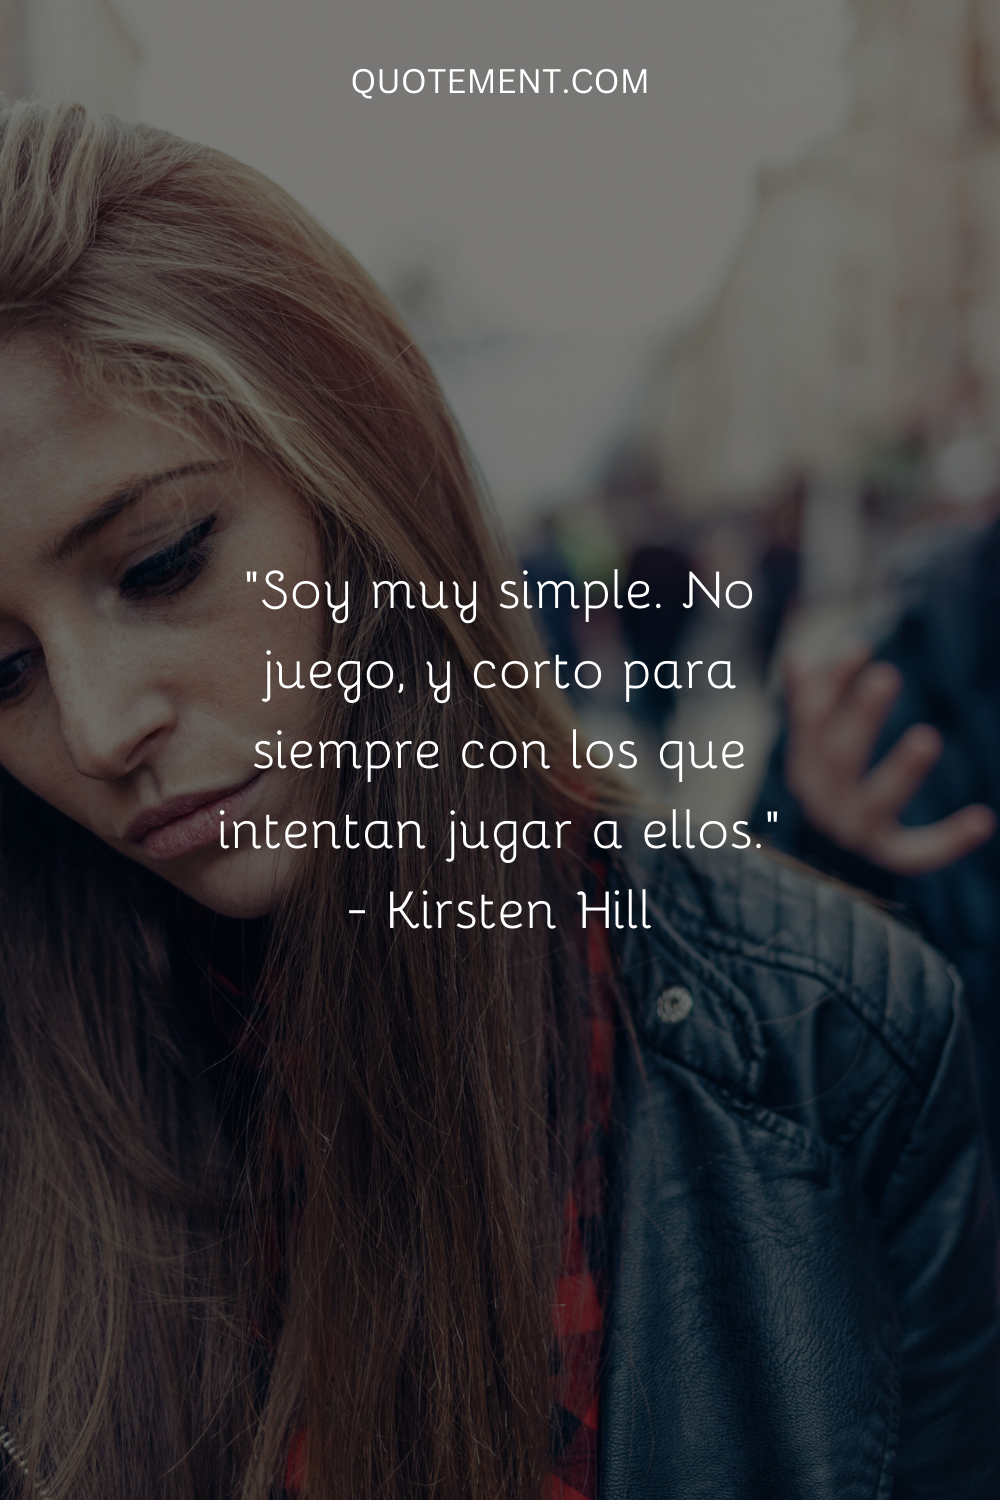 Soy muy simple